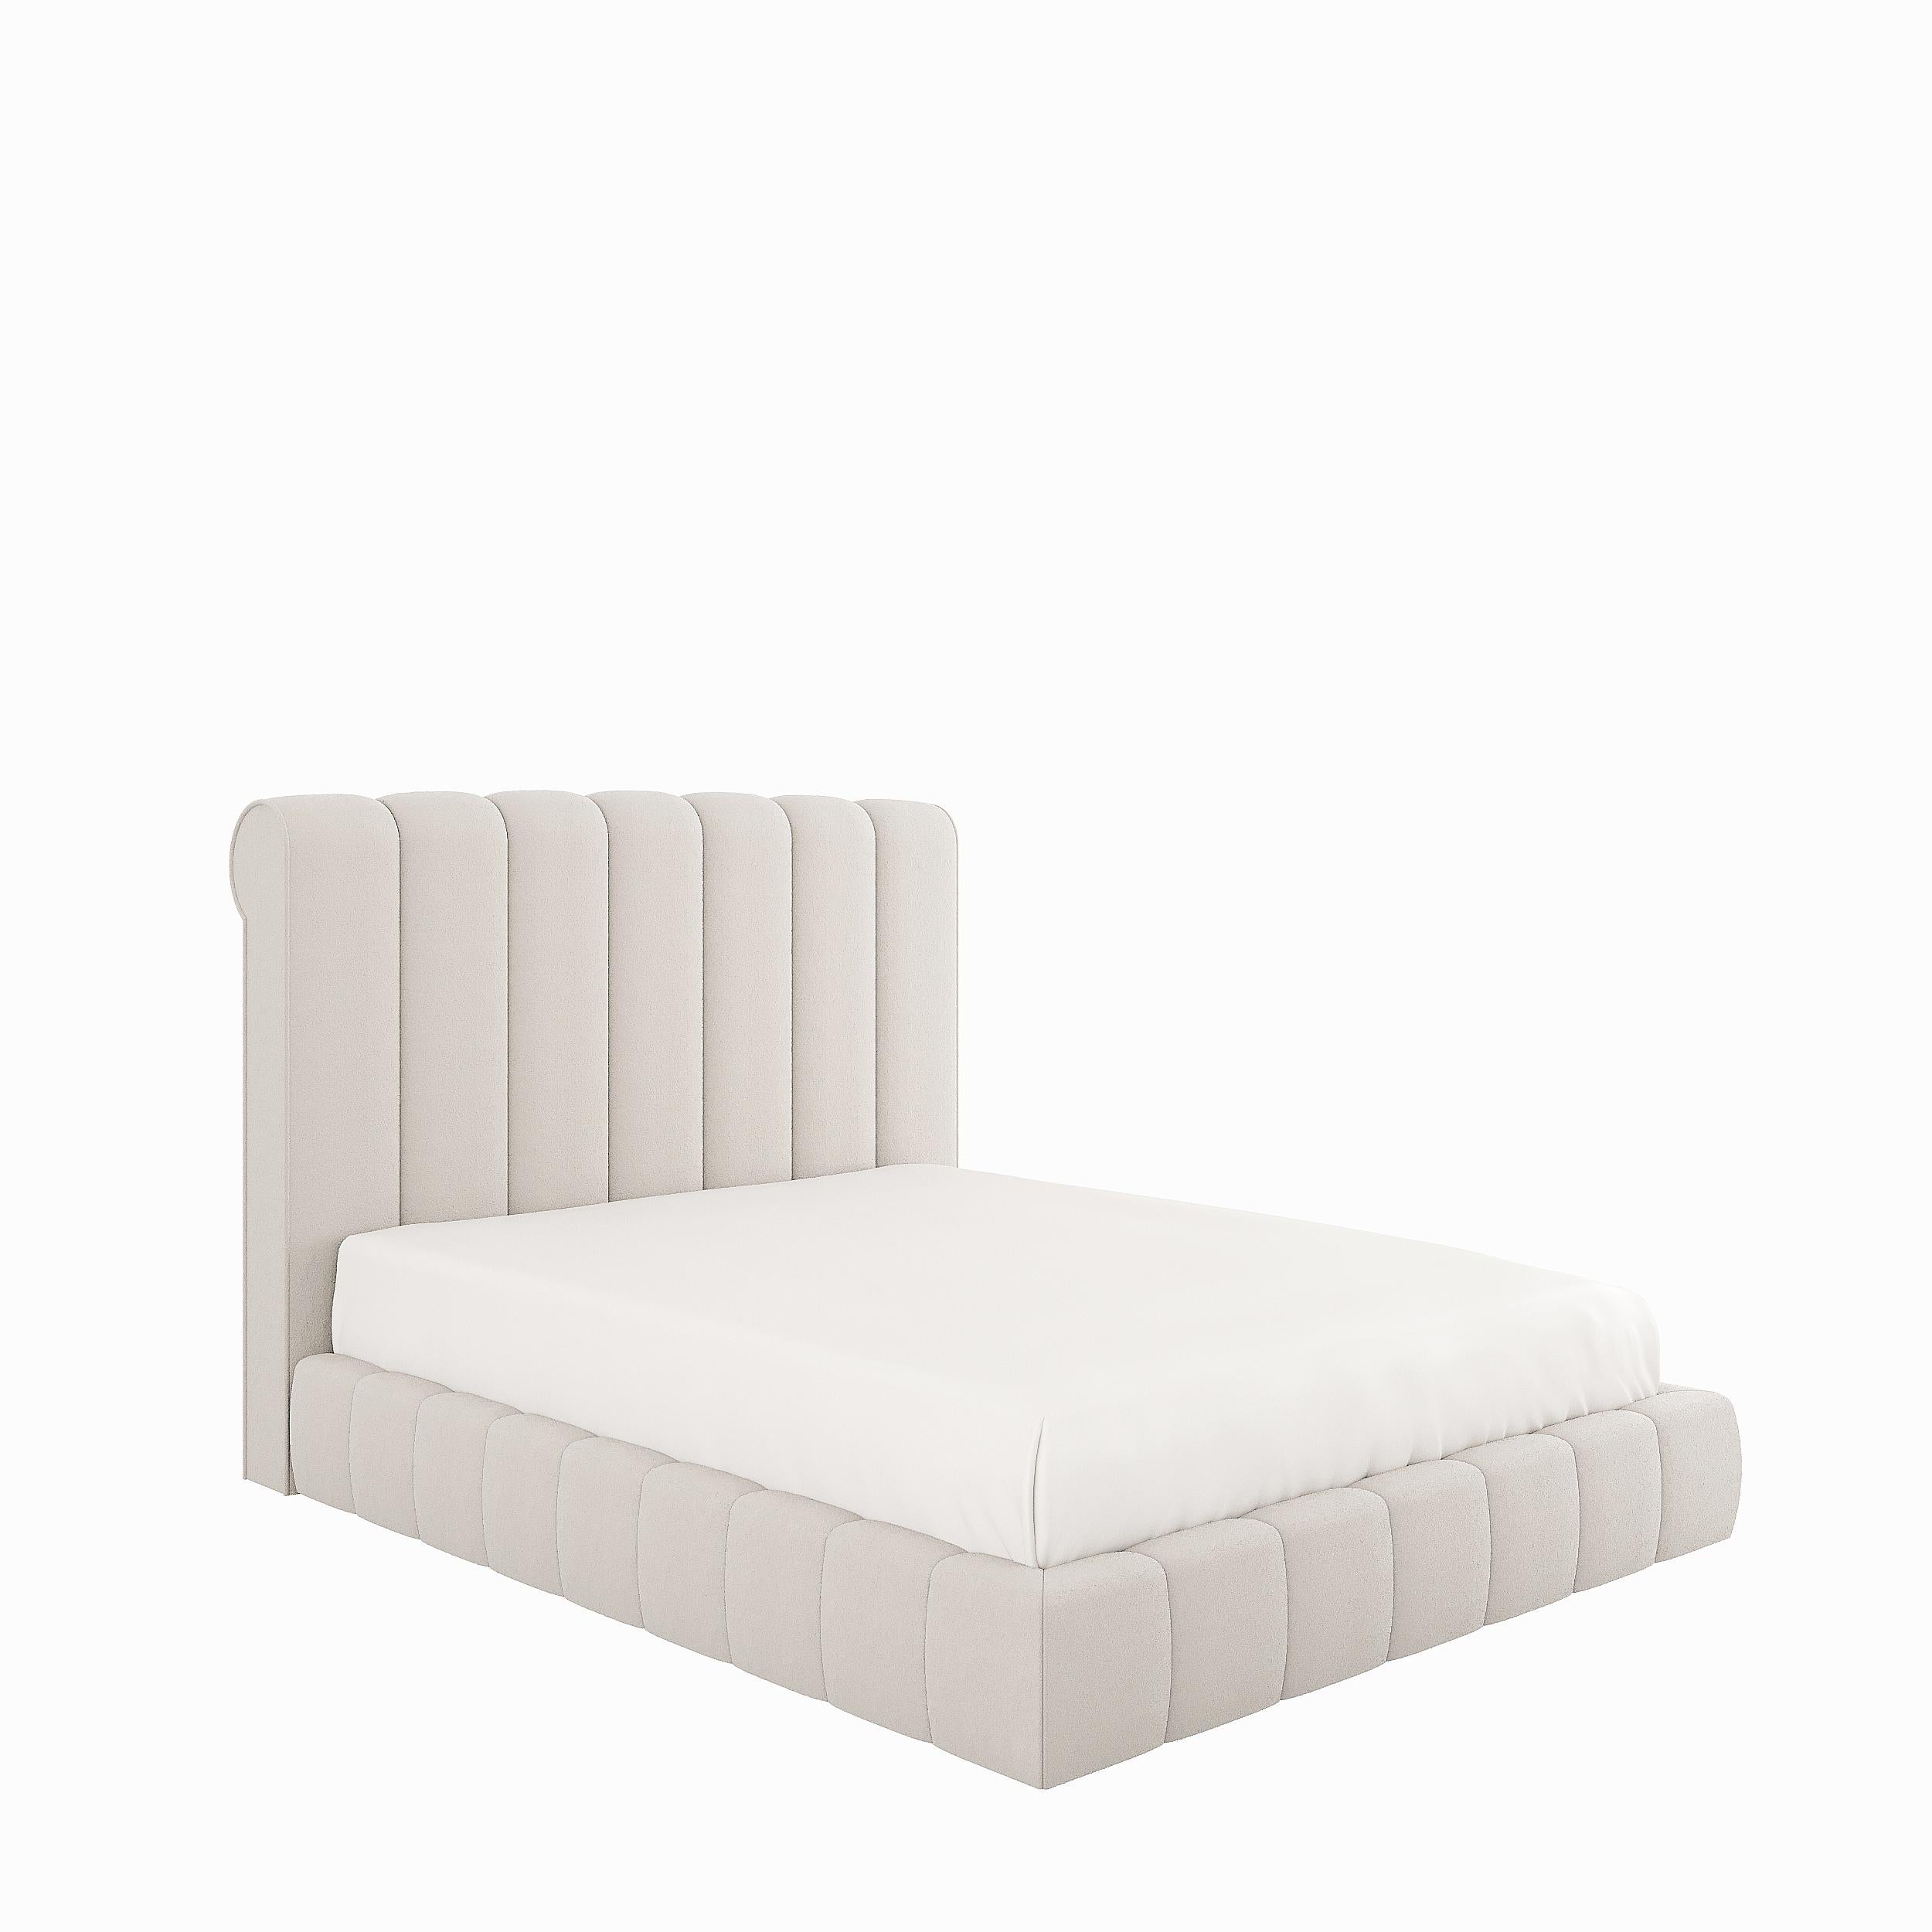 BRISA bed with upholstered headboard and base In New Condition For Sale In Frazão, Porto